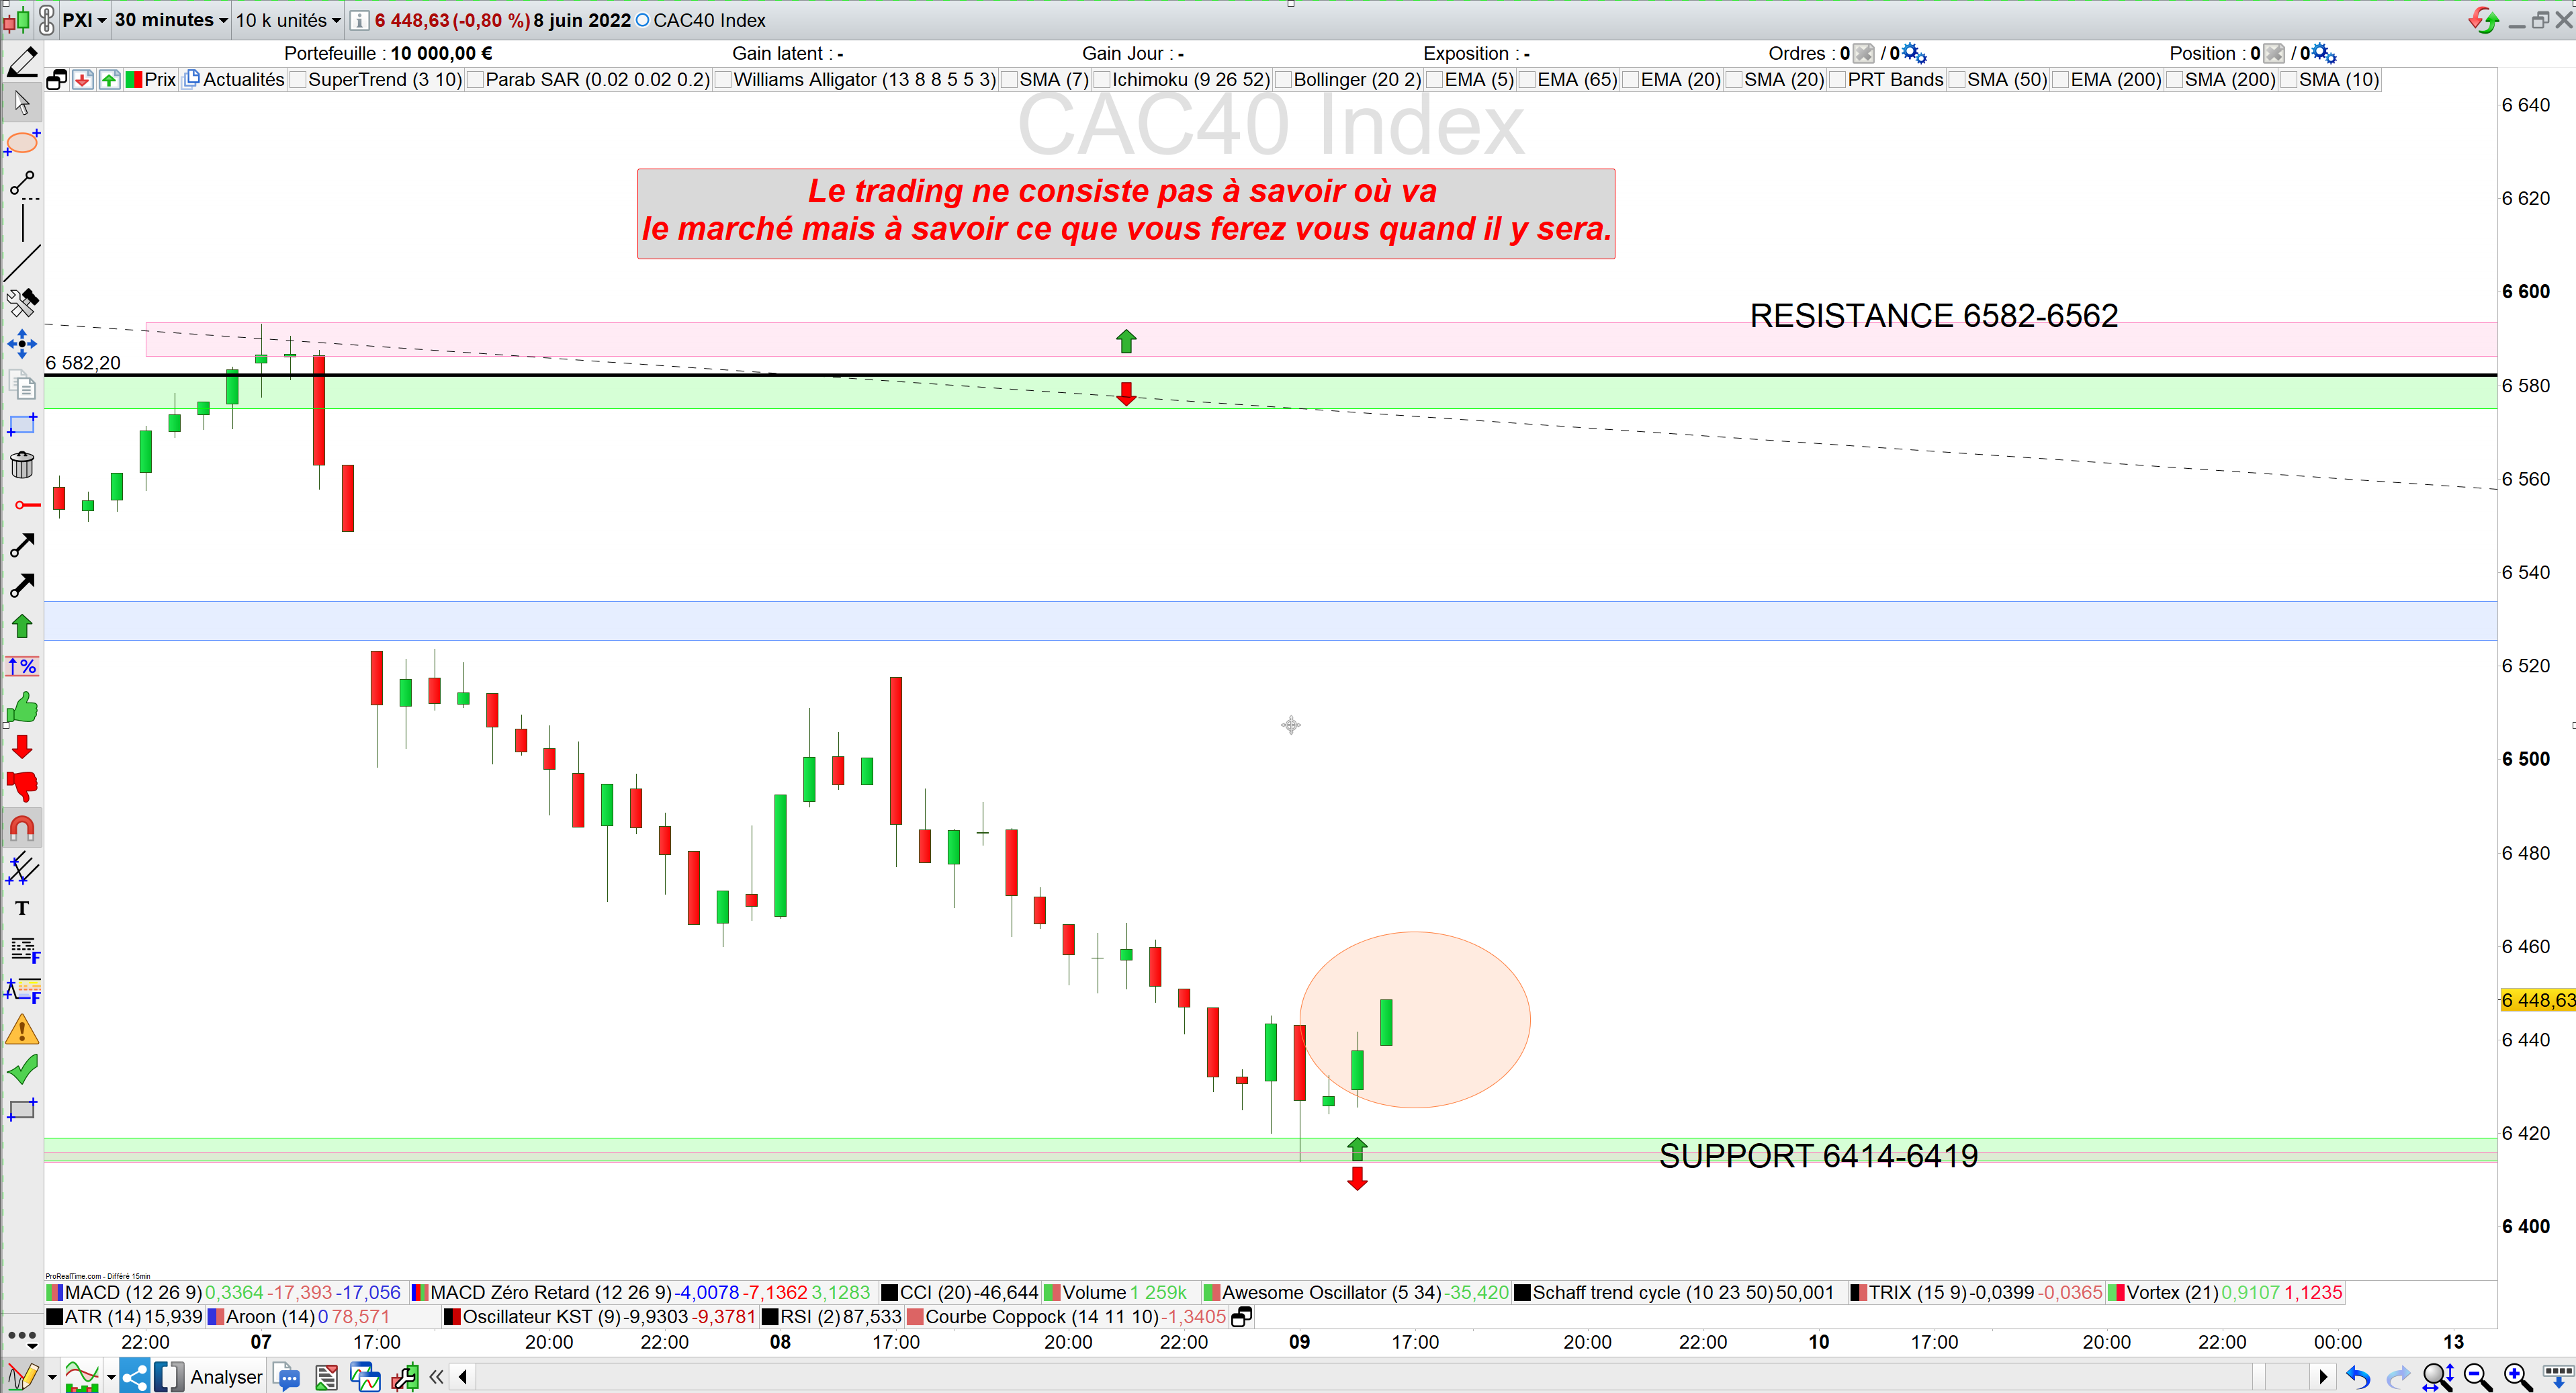 Trading cac40 09/06/22